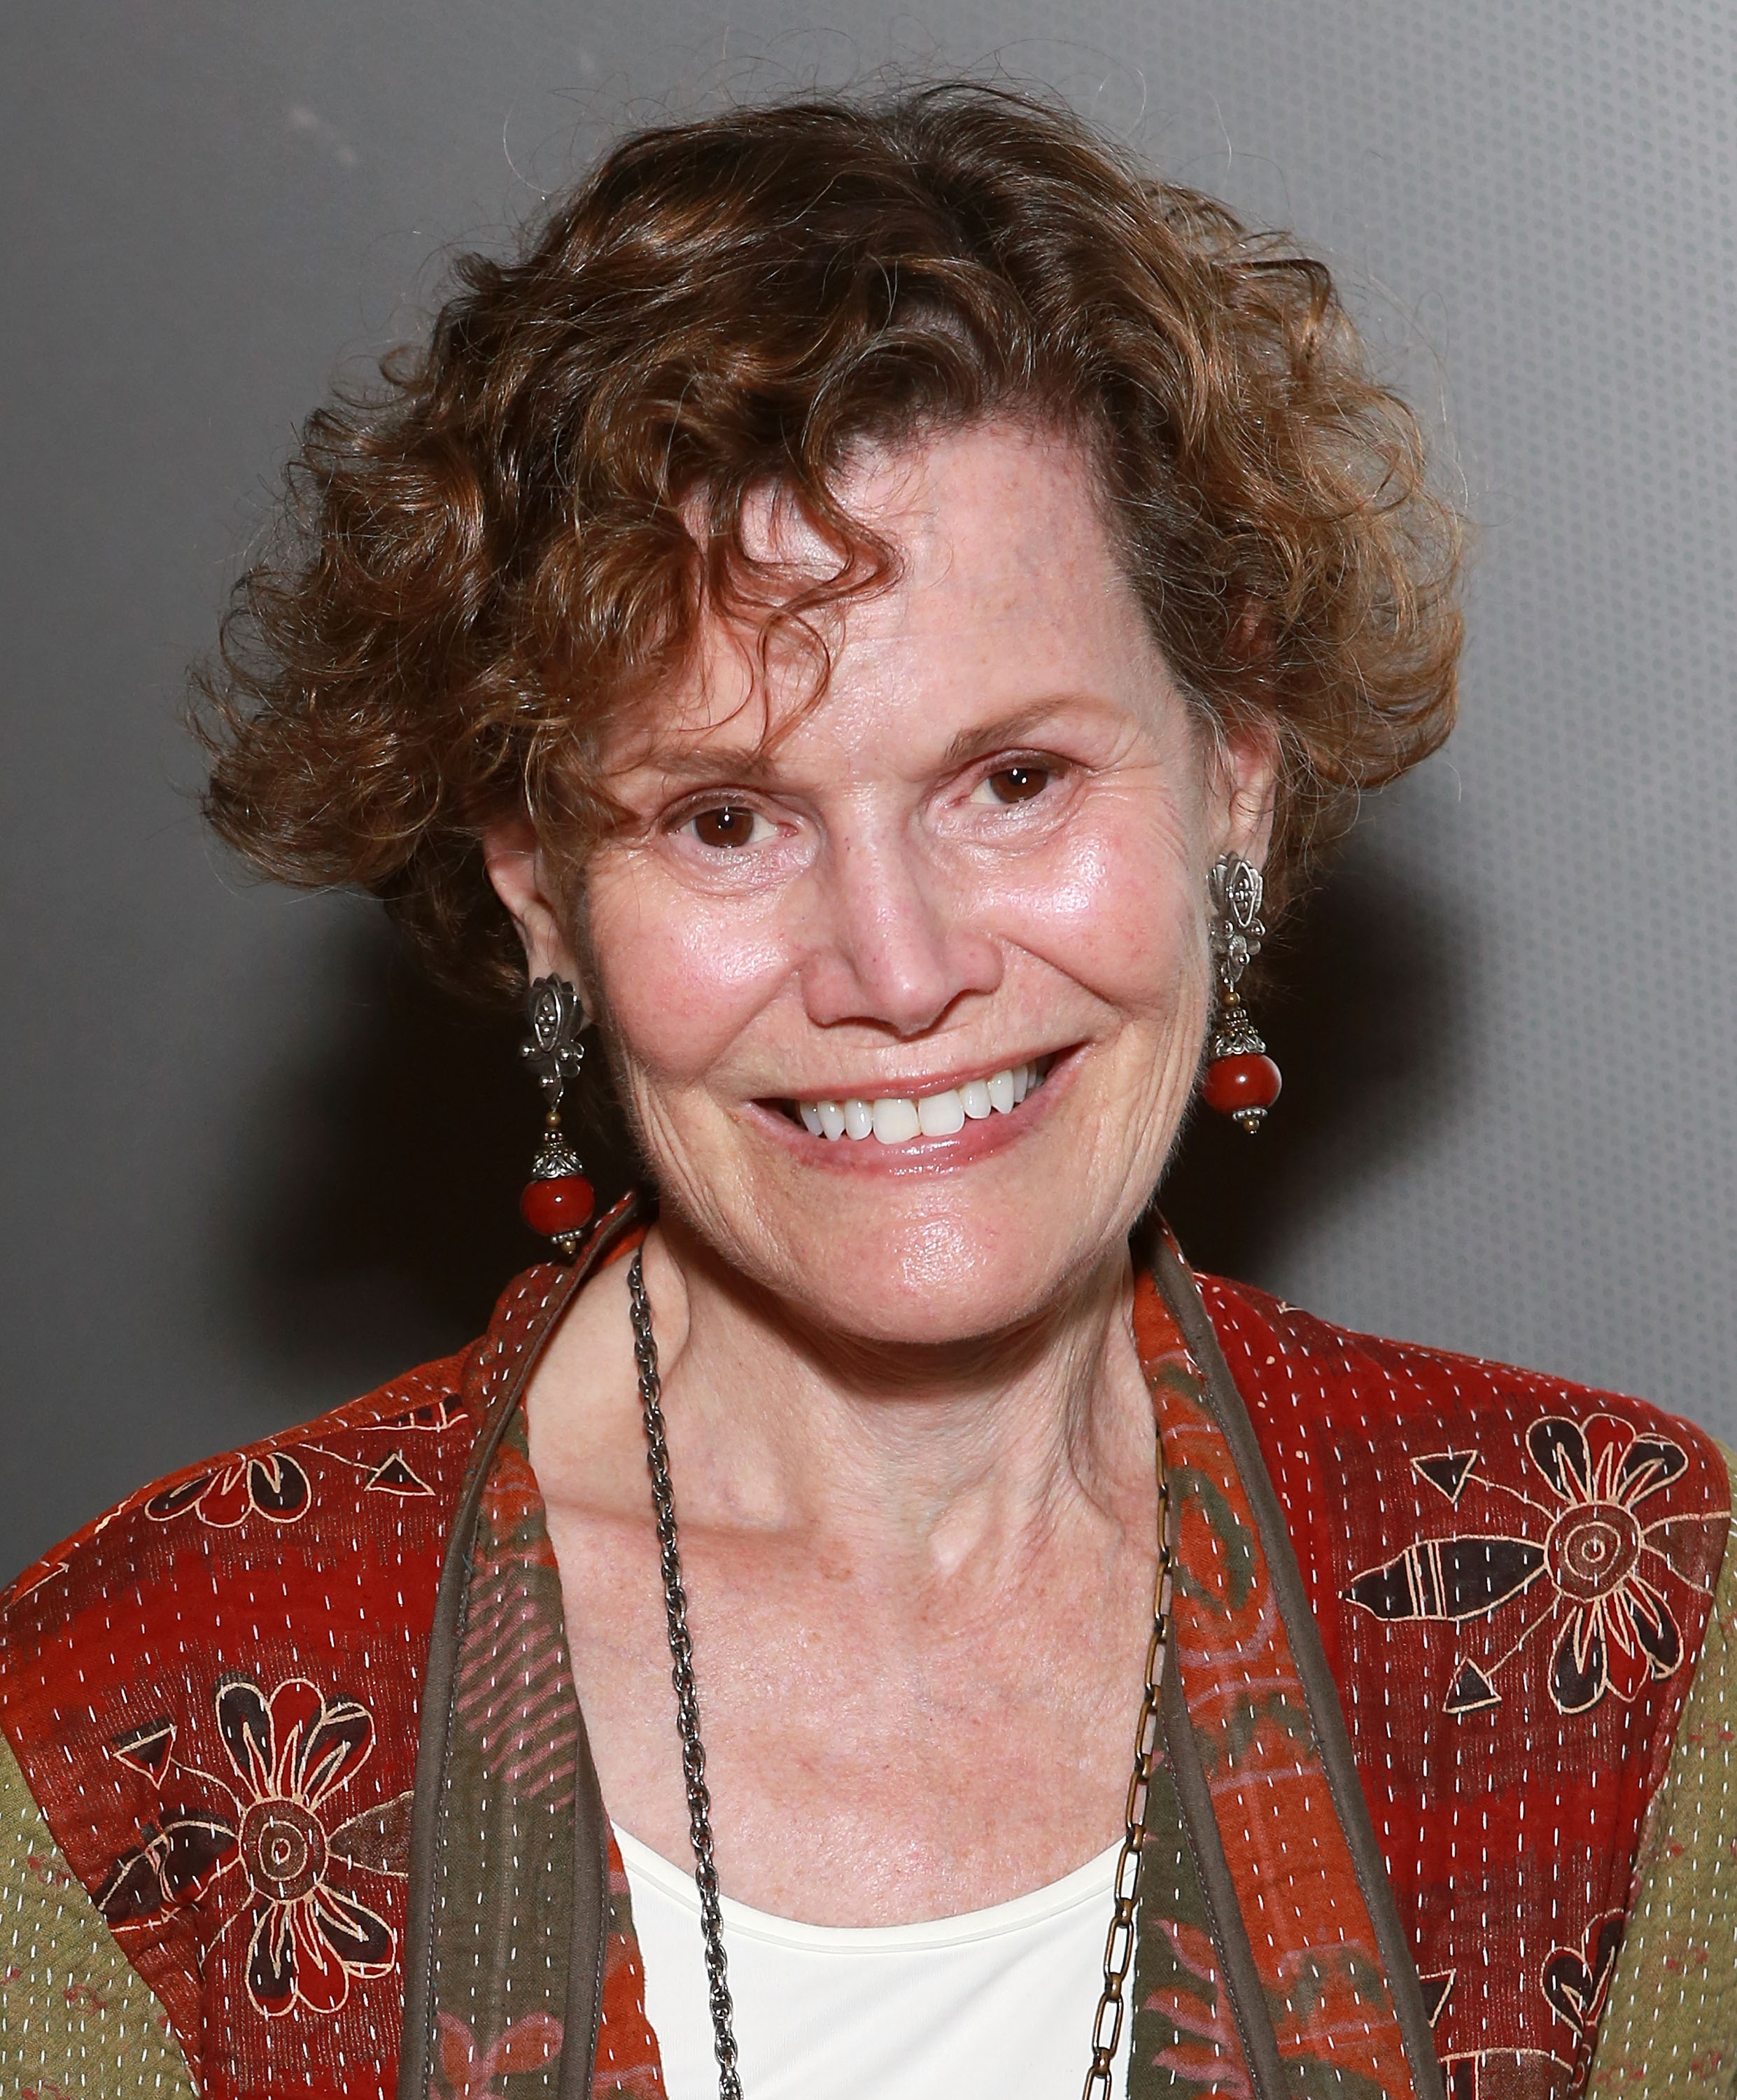 Author and producer Judy Blume attends "Tiger Eyes" New York Premiere at AMC Empire on June 7, 2013 in New York City.